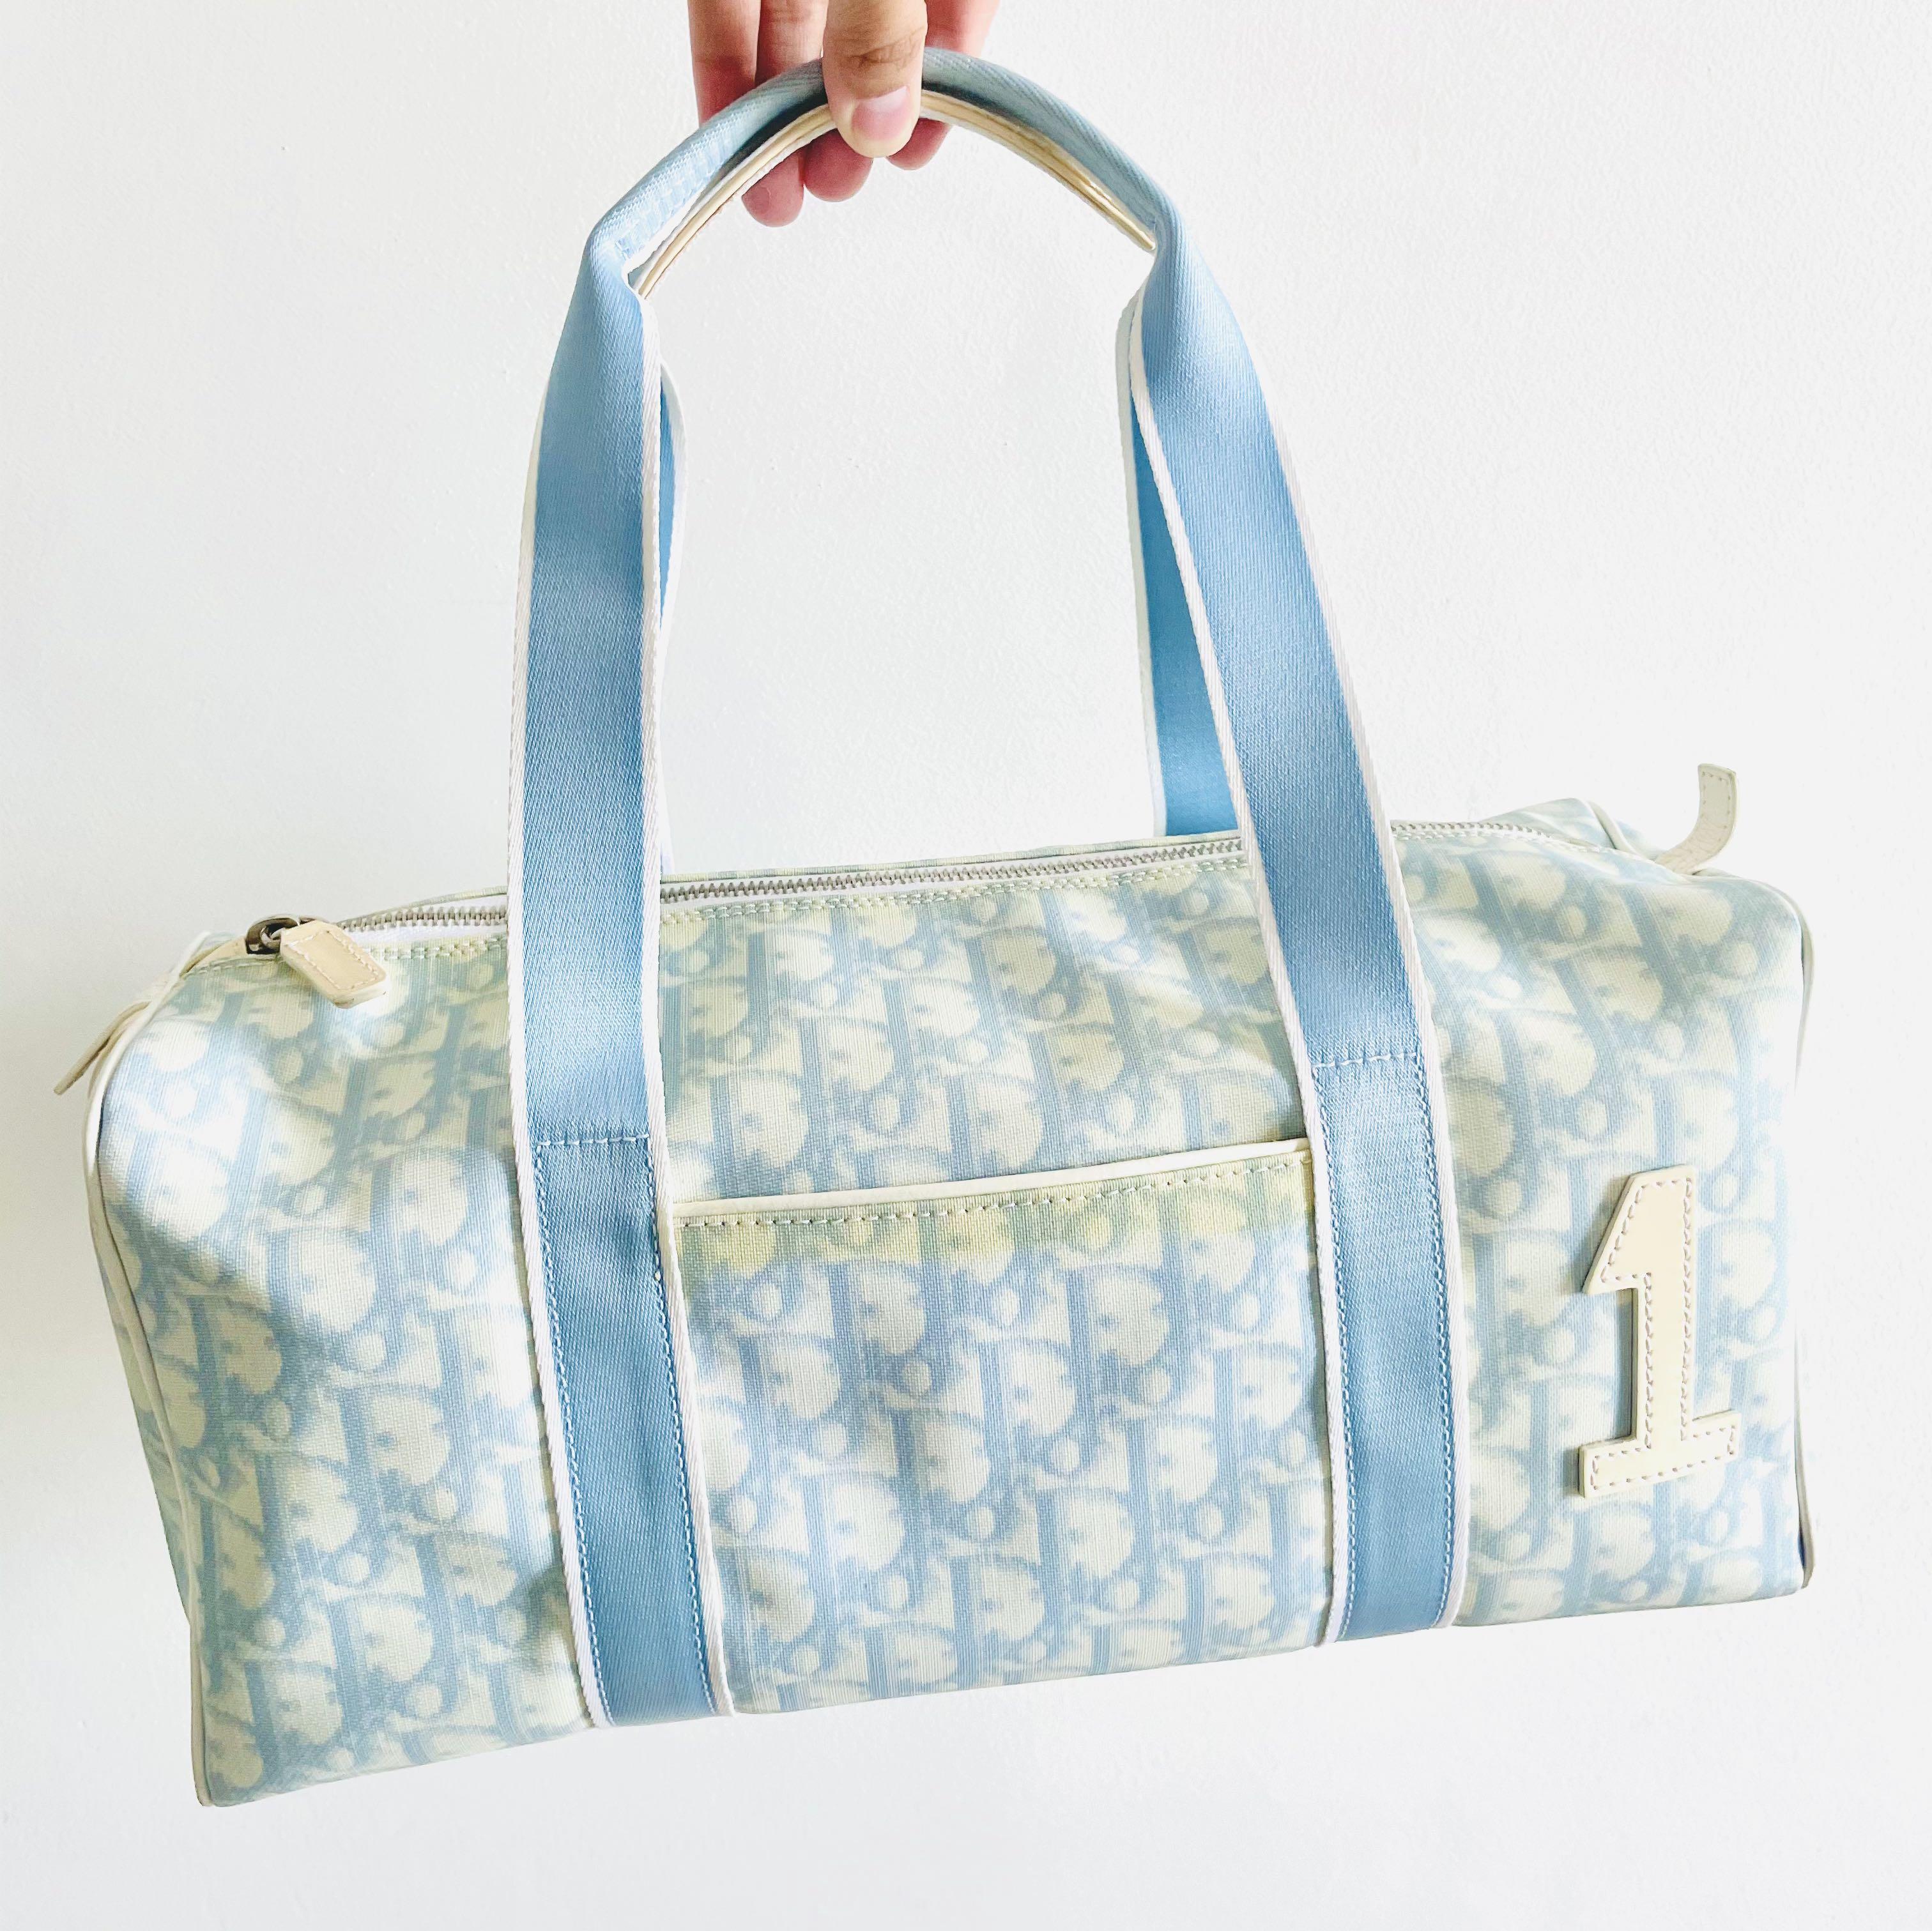 Luxe Diaper Bags For The Boy Mom  Guinwa